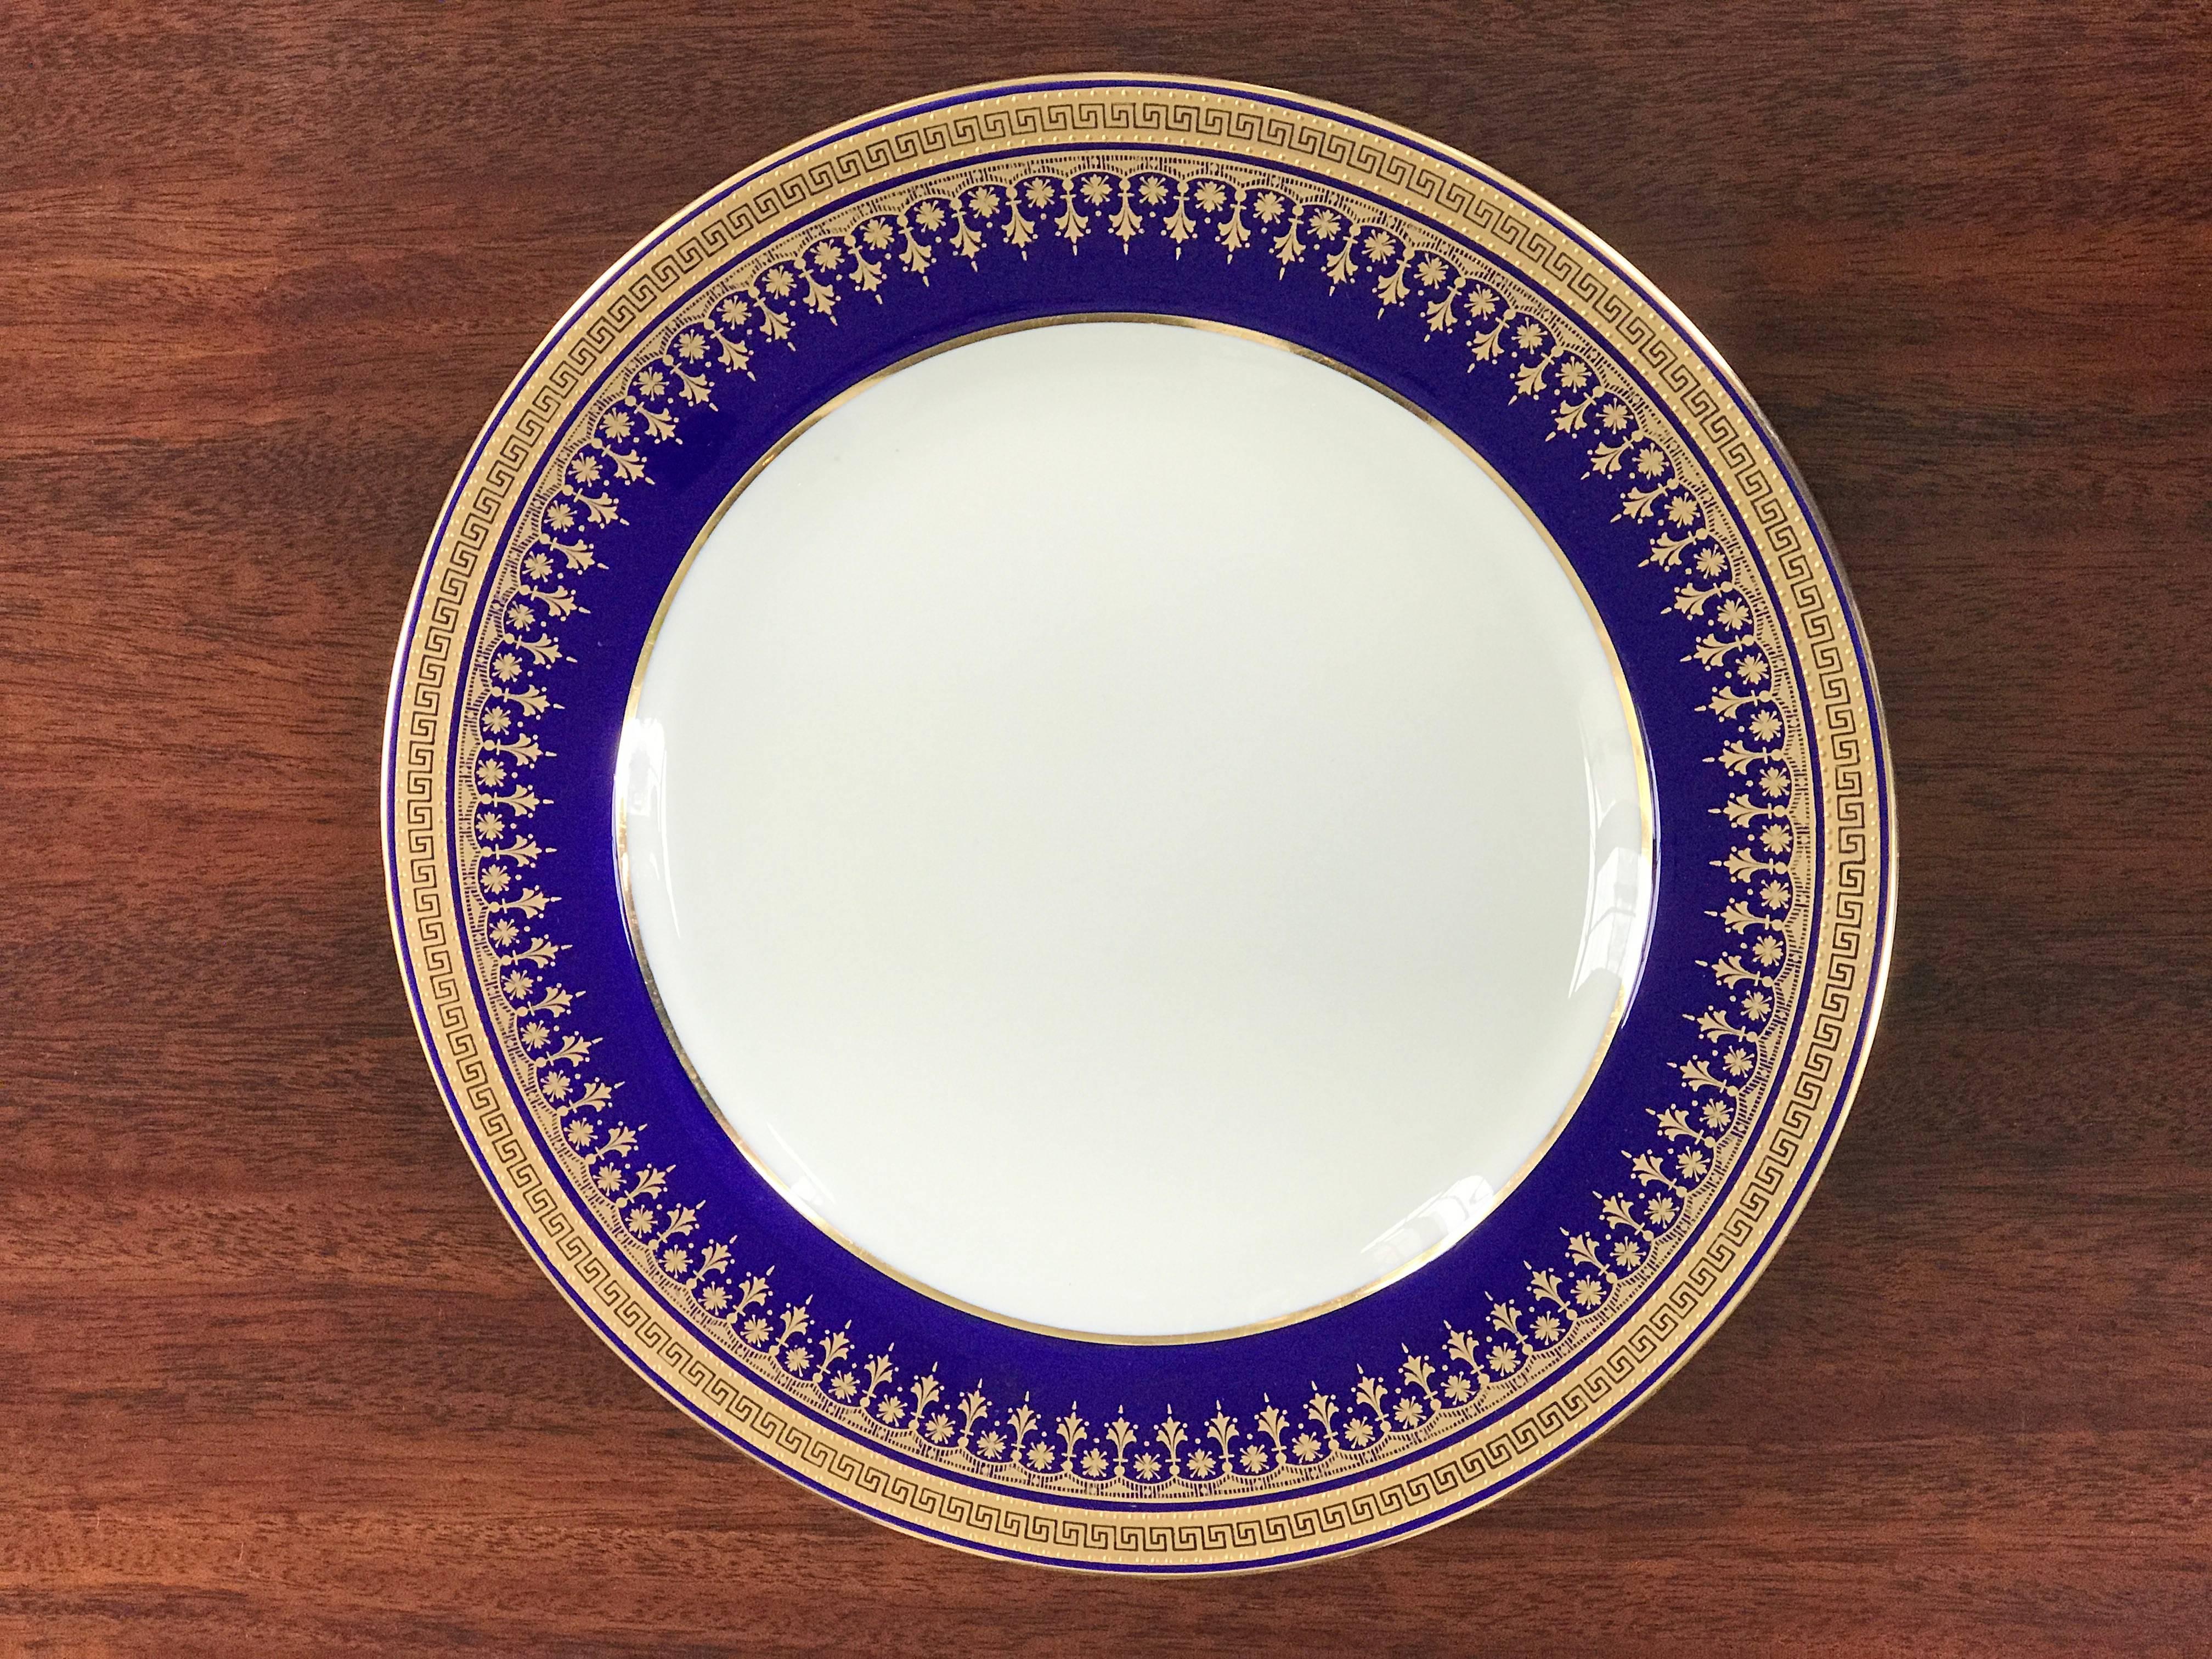 This gorgeous set of 12 Copeland Plates was commissioned for Davis Collamore & Co 5th Avenue New York . These dinner plates are in mint condition! 
The 3 dimensional raised gold on a cobalt blue border is lined with the ancient Greek Key